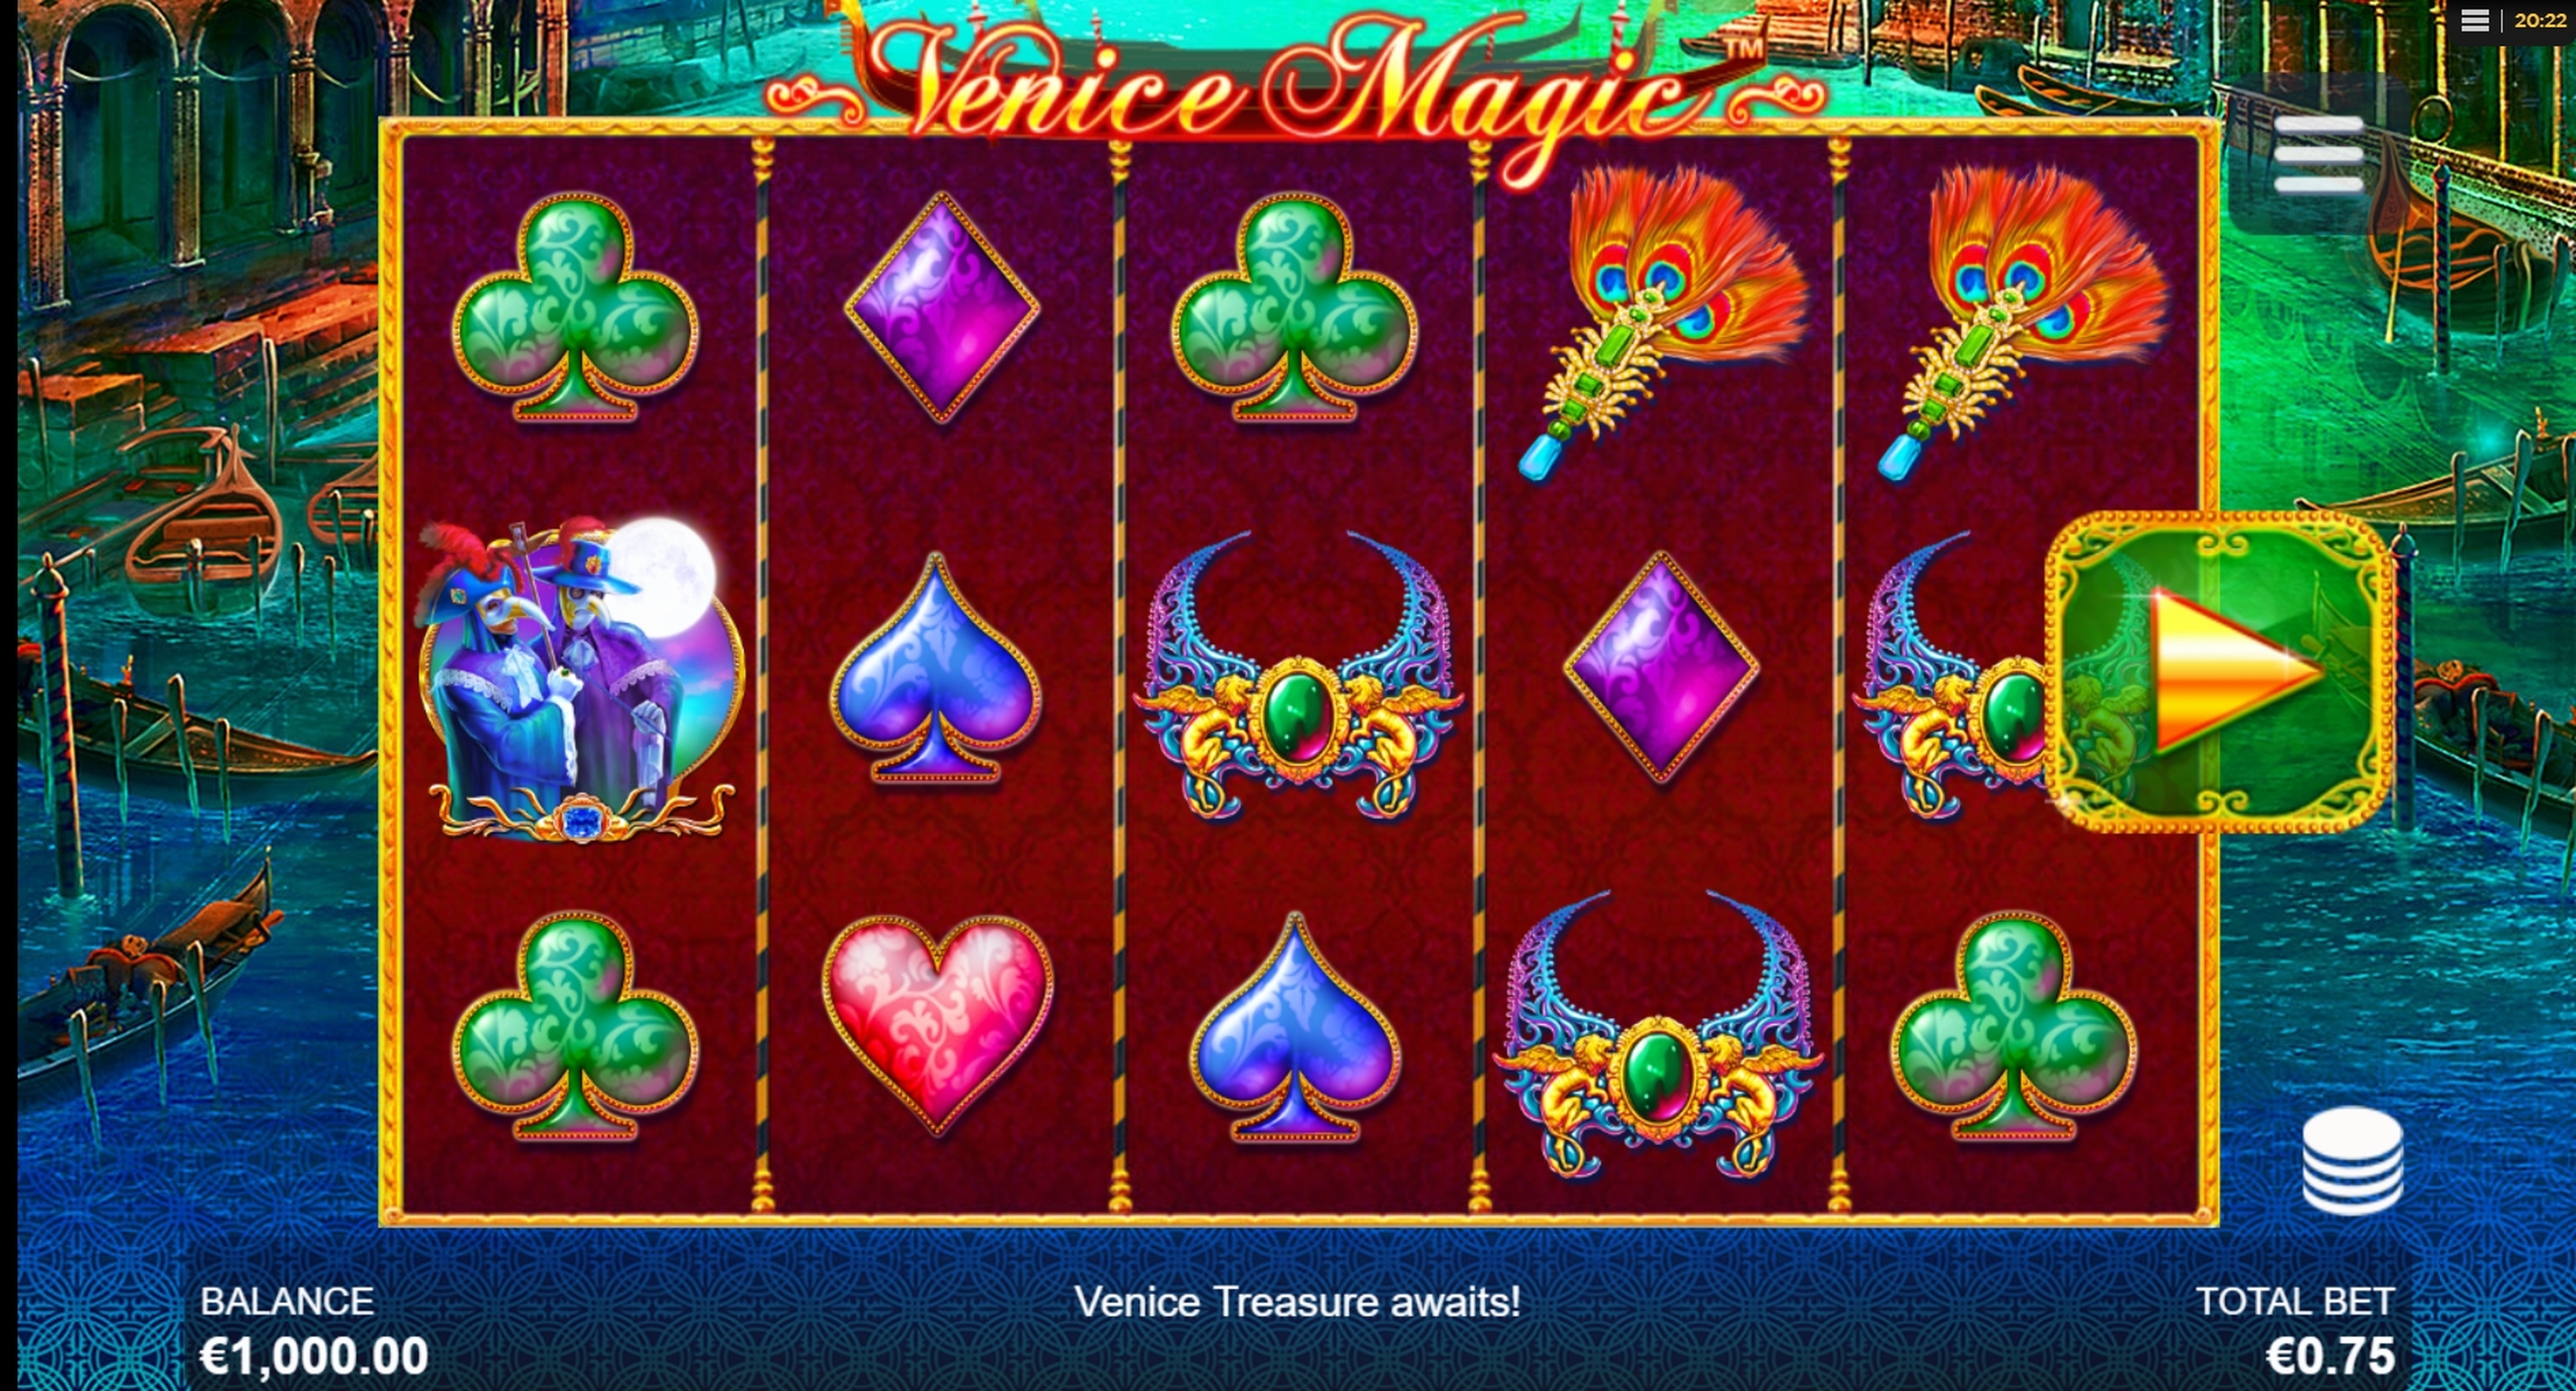 Reels in Venice Magic Slot Game by Side City Studios